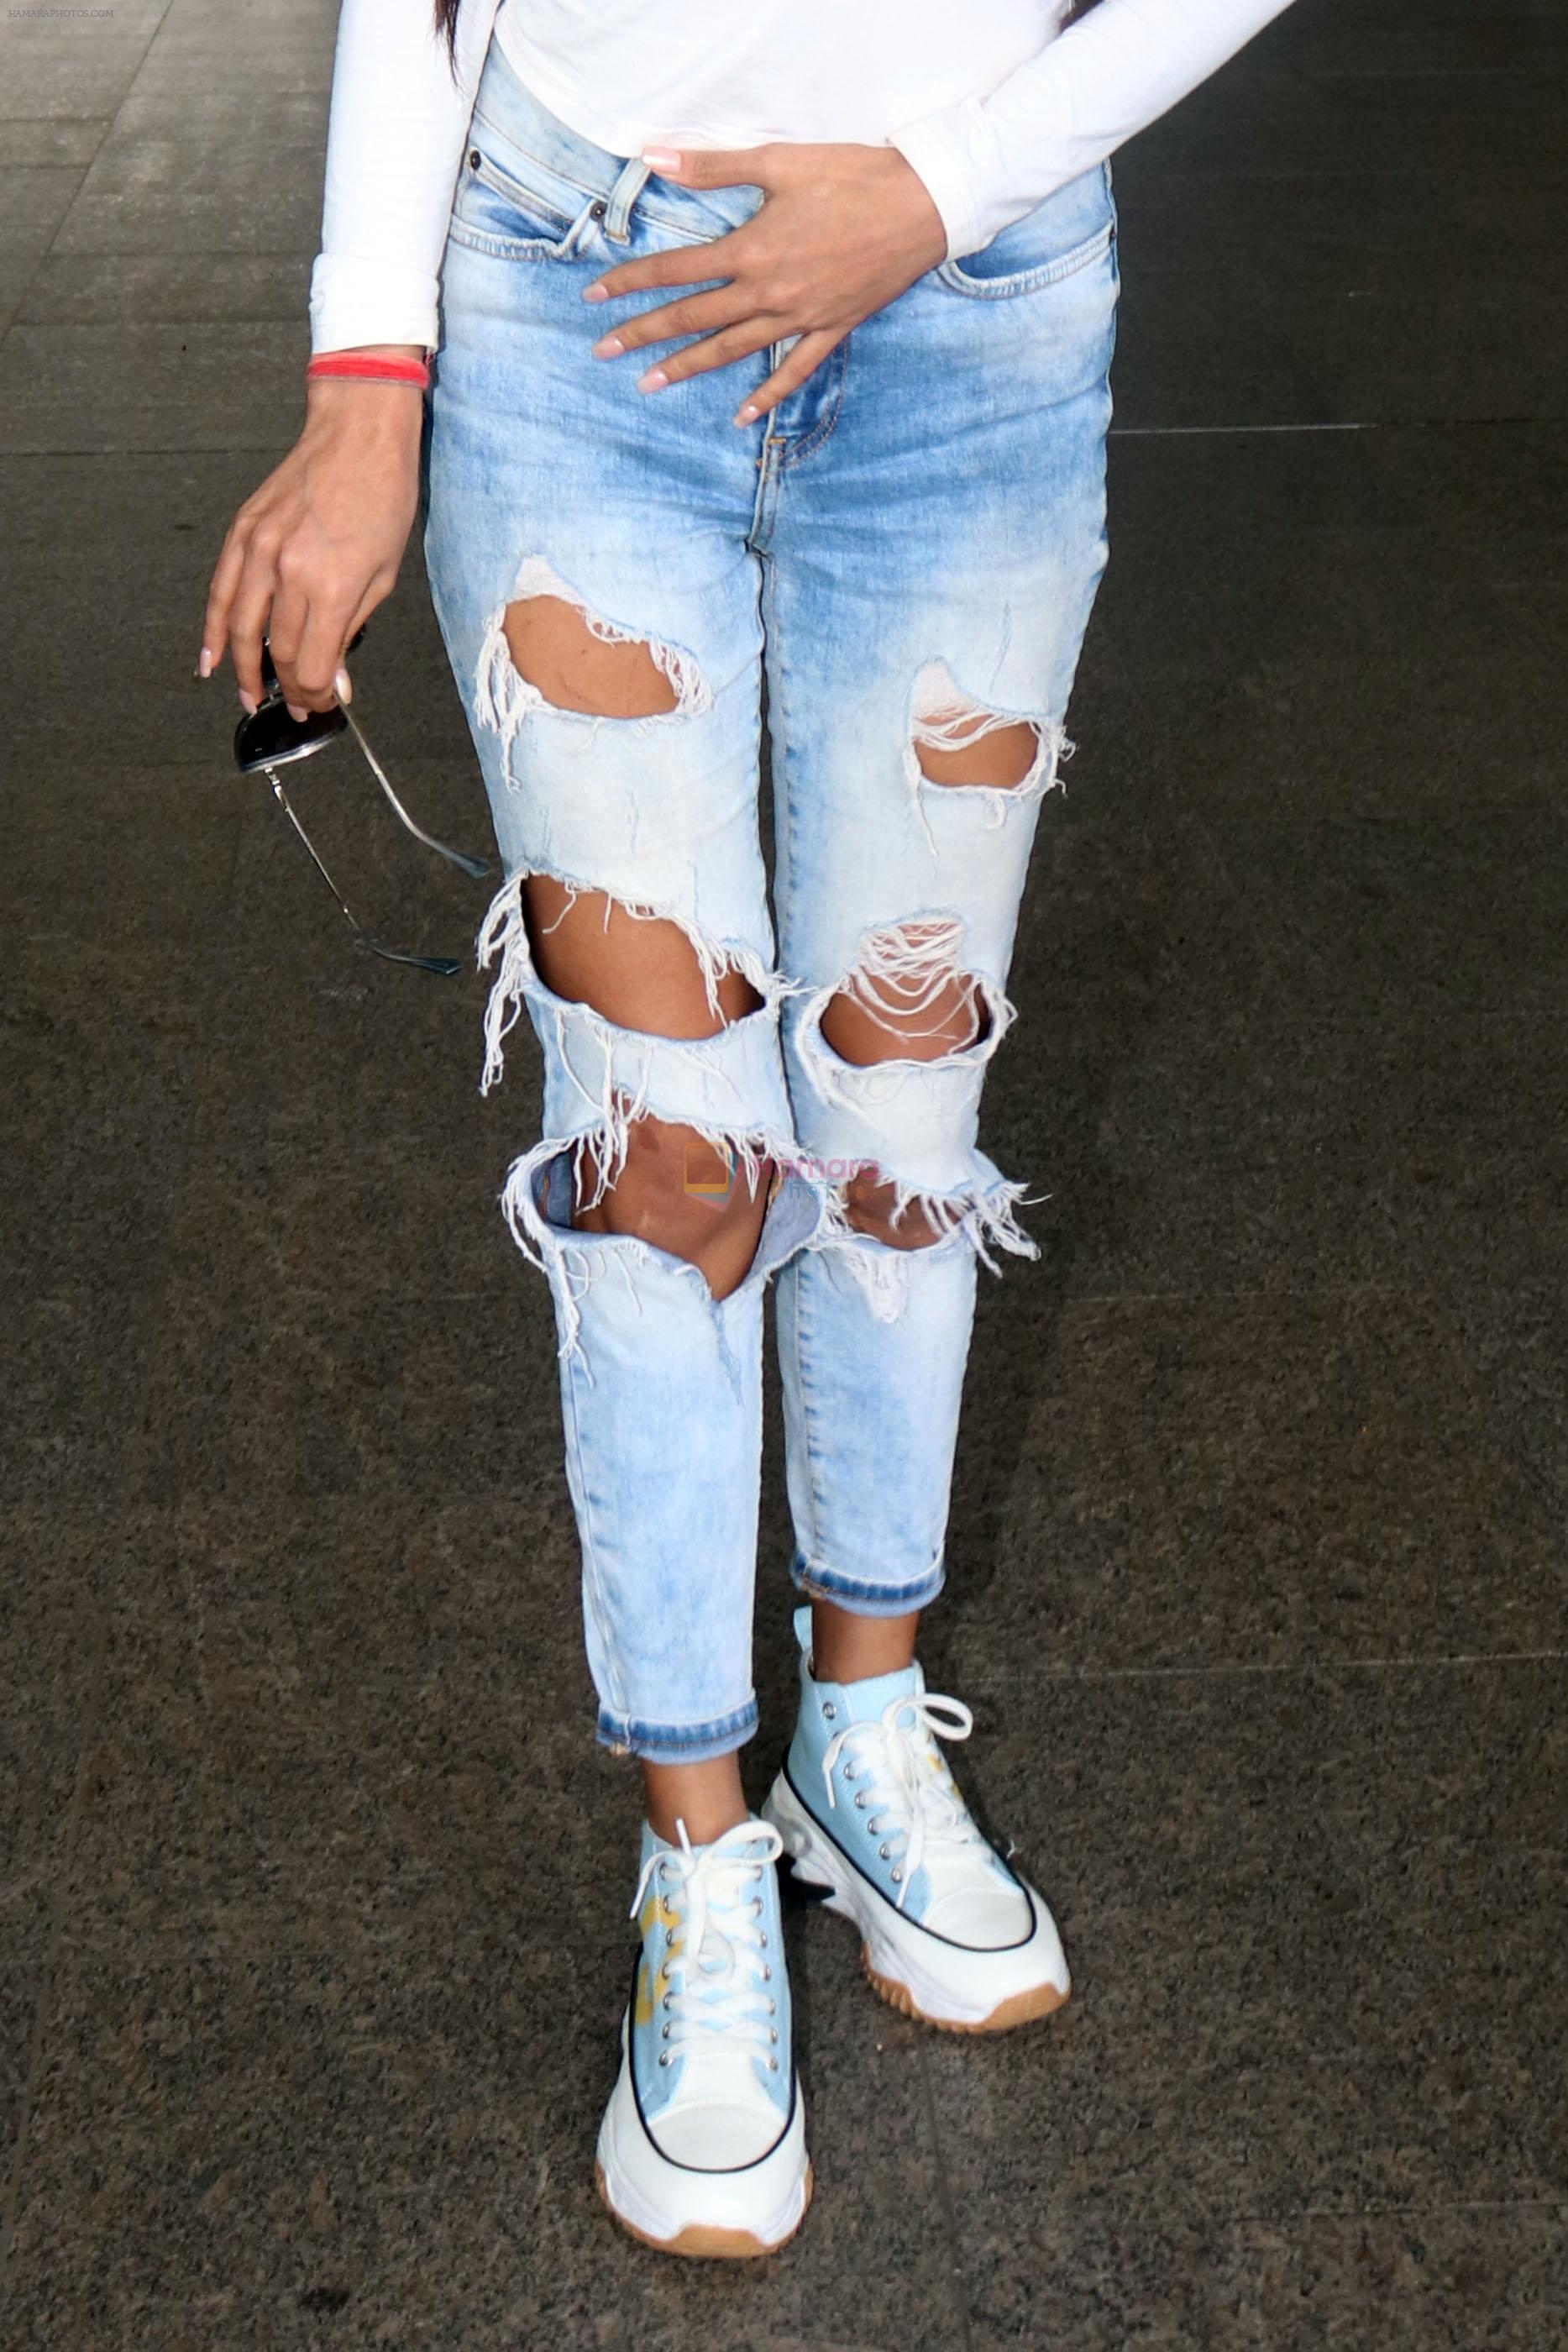 Poonam Pandey in white Cest La Vie Paris t-shirt and blue shredded jeans seen at the airport on 1 July 2023